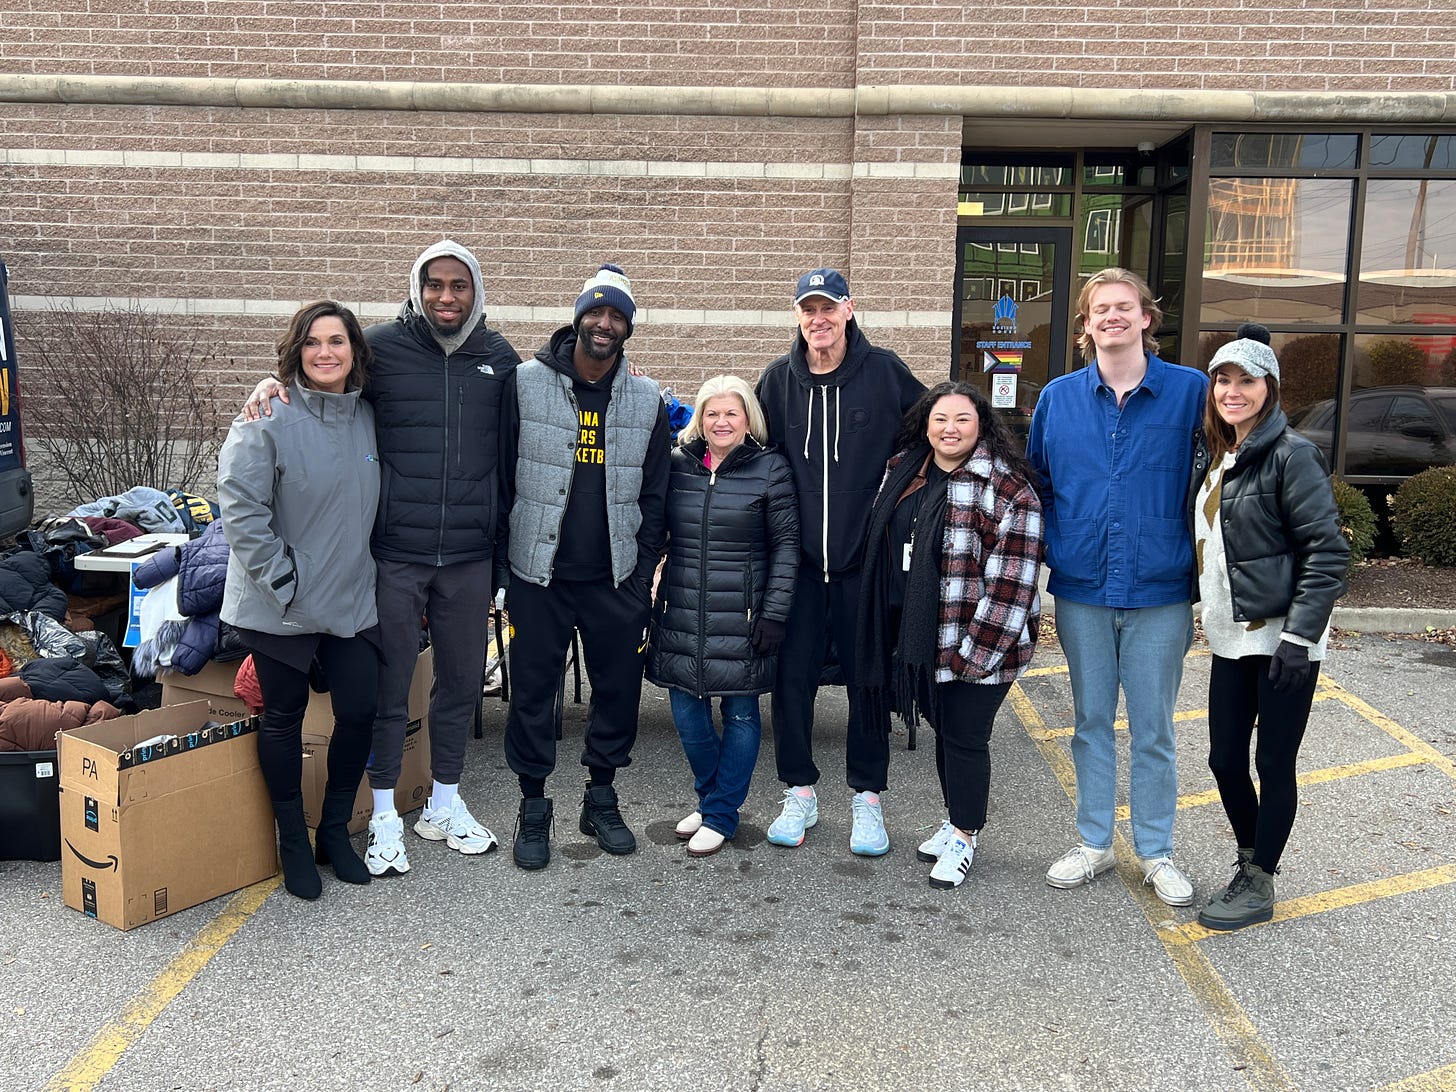 Nesmith, Pierce, Carlisle and members of the Horizon House board outside collecting coats.